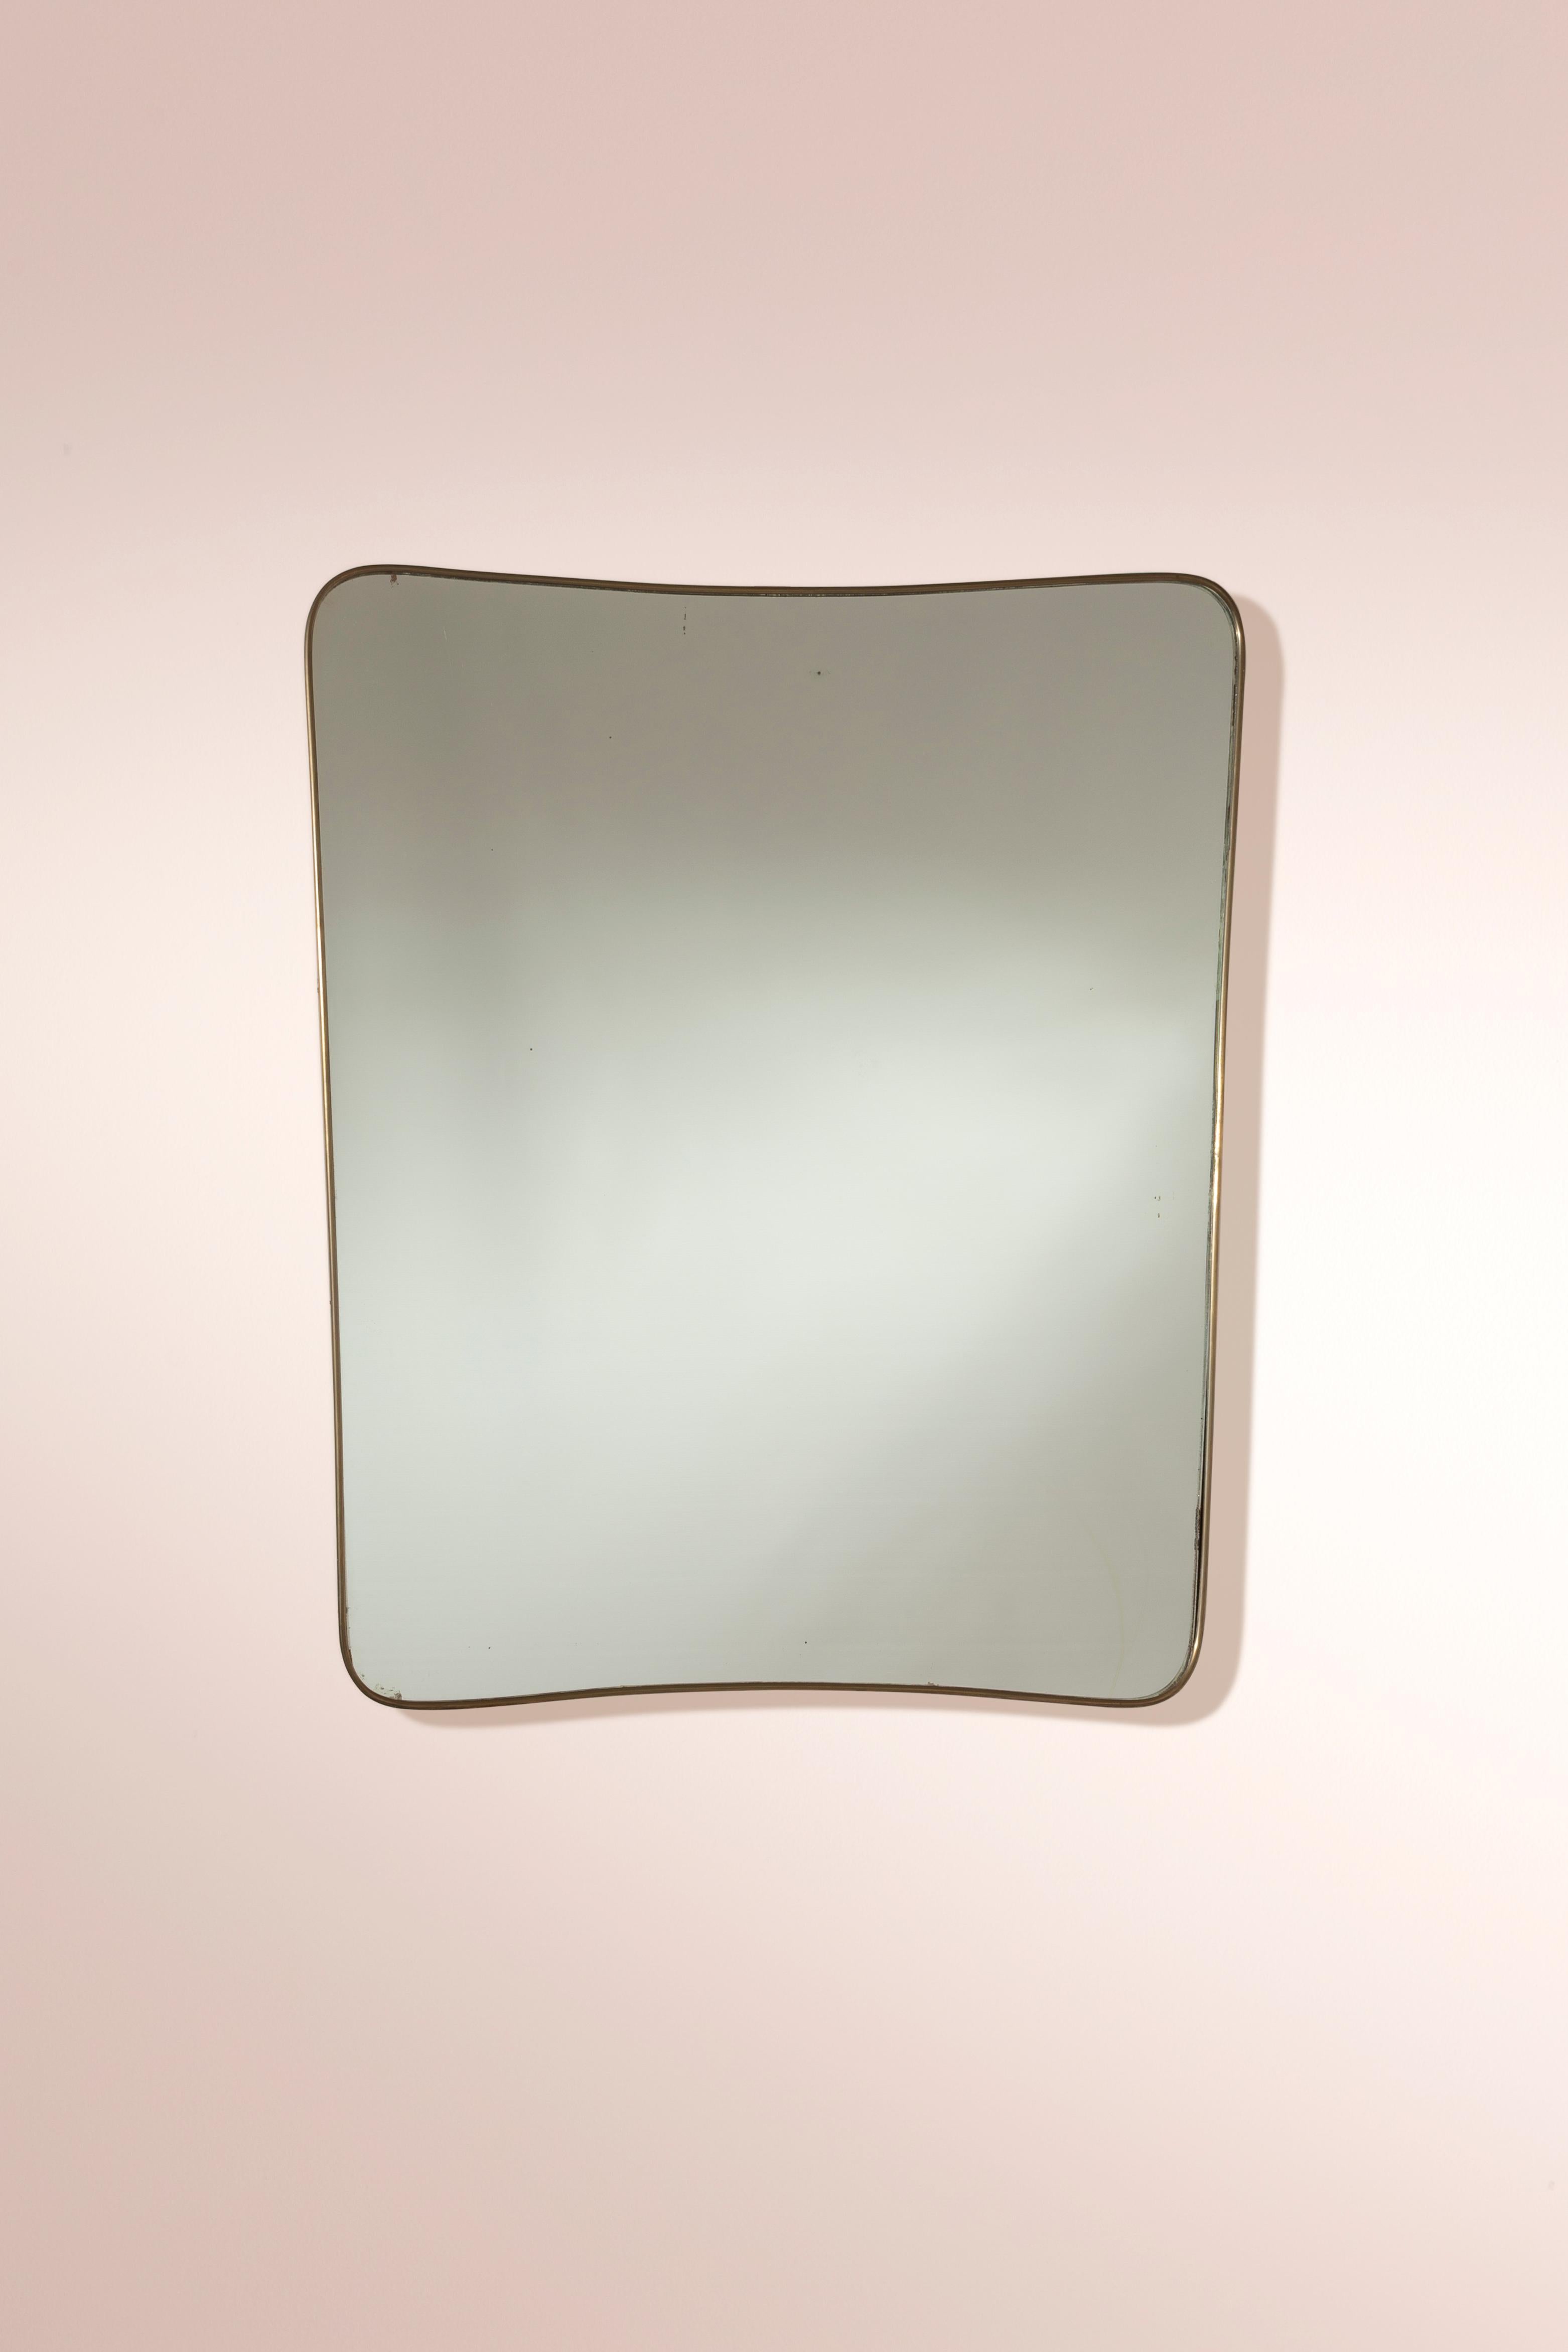 A substantial Italian brass wall mirror, hailing from the 1950s, epitomizes an elegant fusion of form and function with its simplistic yet refined design.

Crafted with precision, this Italian brass mirror exemplifies exceptional vintage